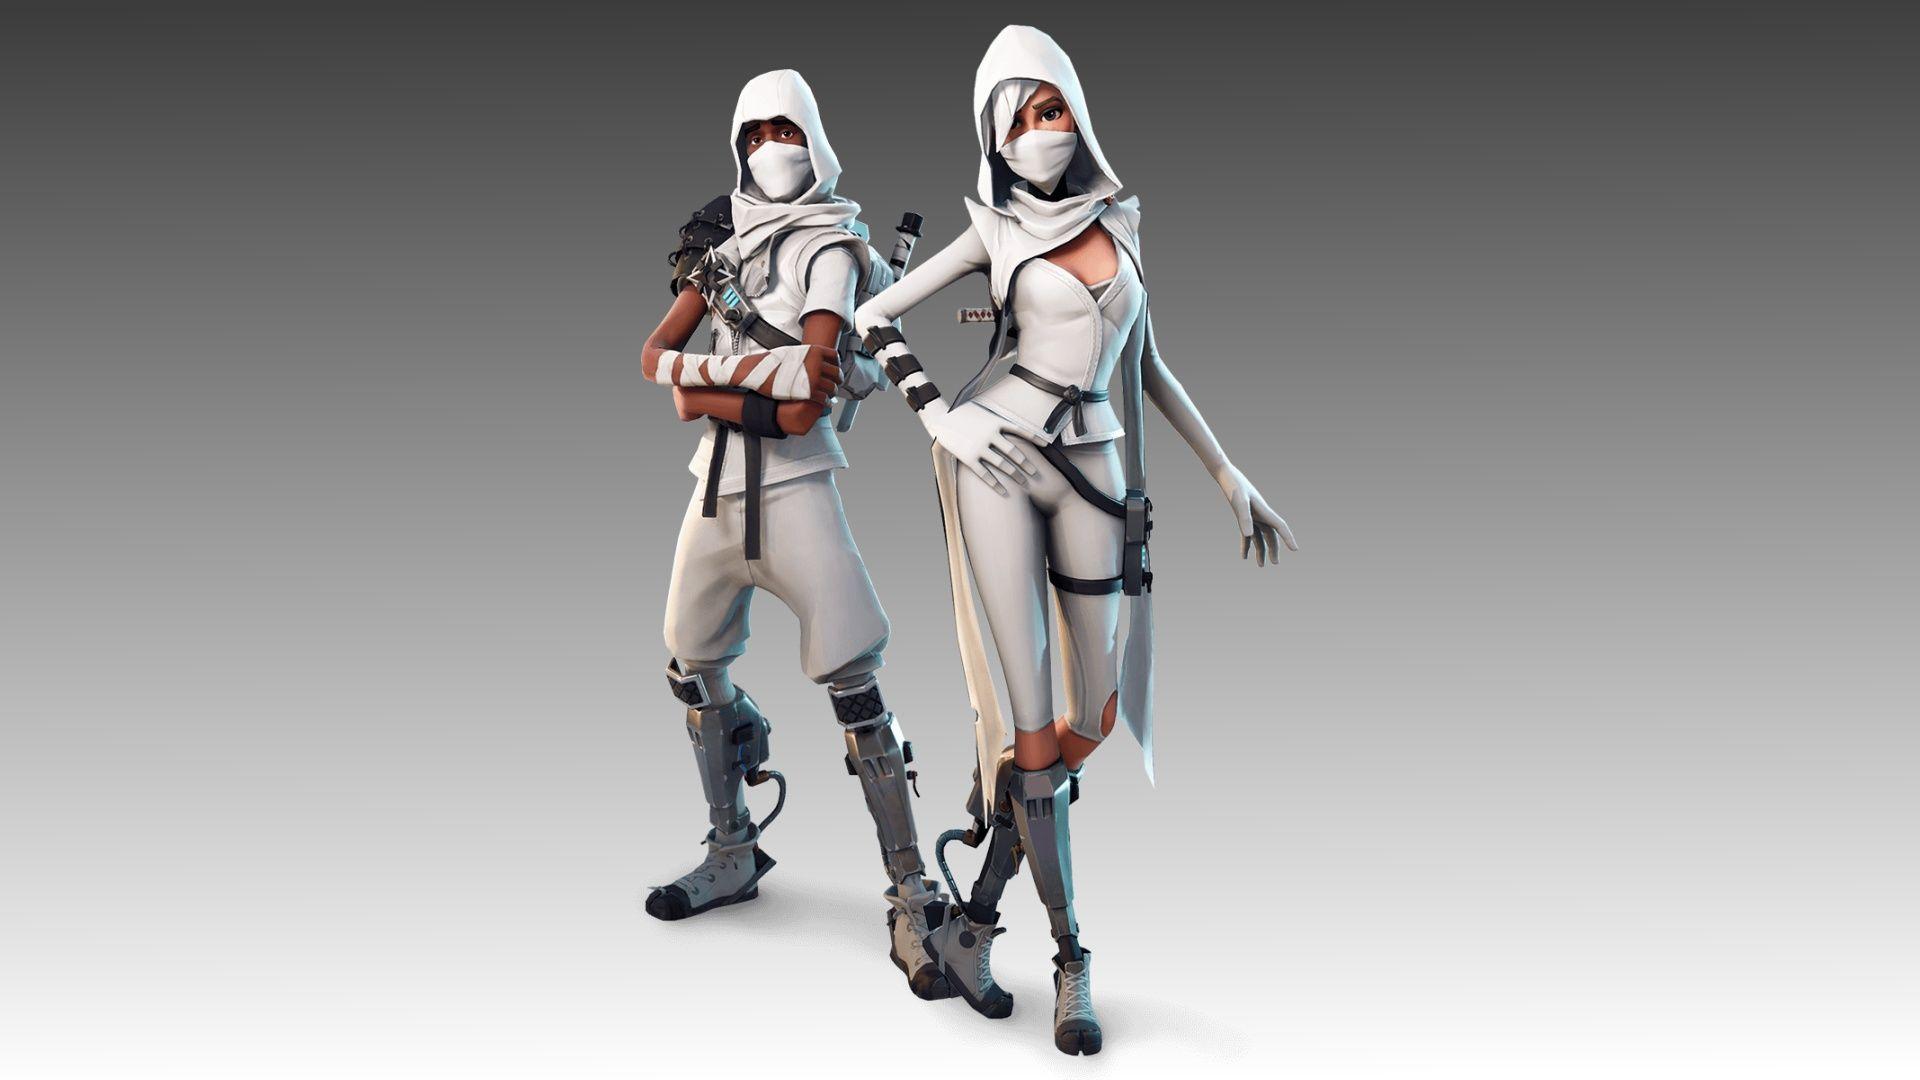 Are we ever going to see slim skins in FortniteBR?